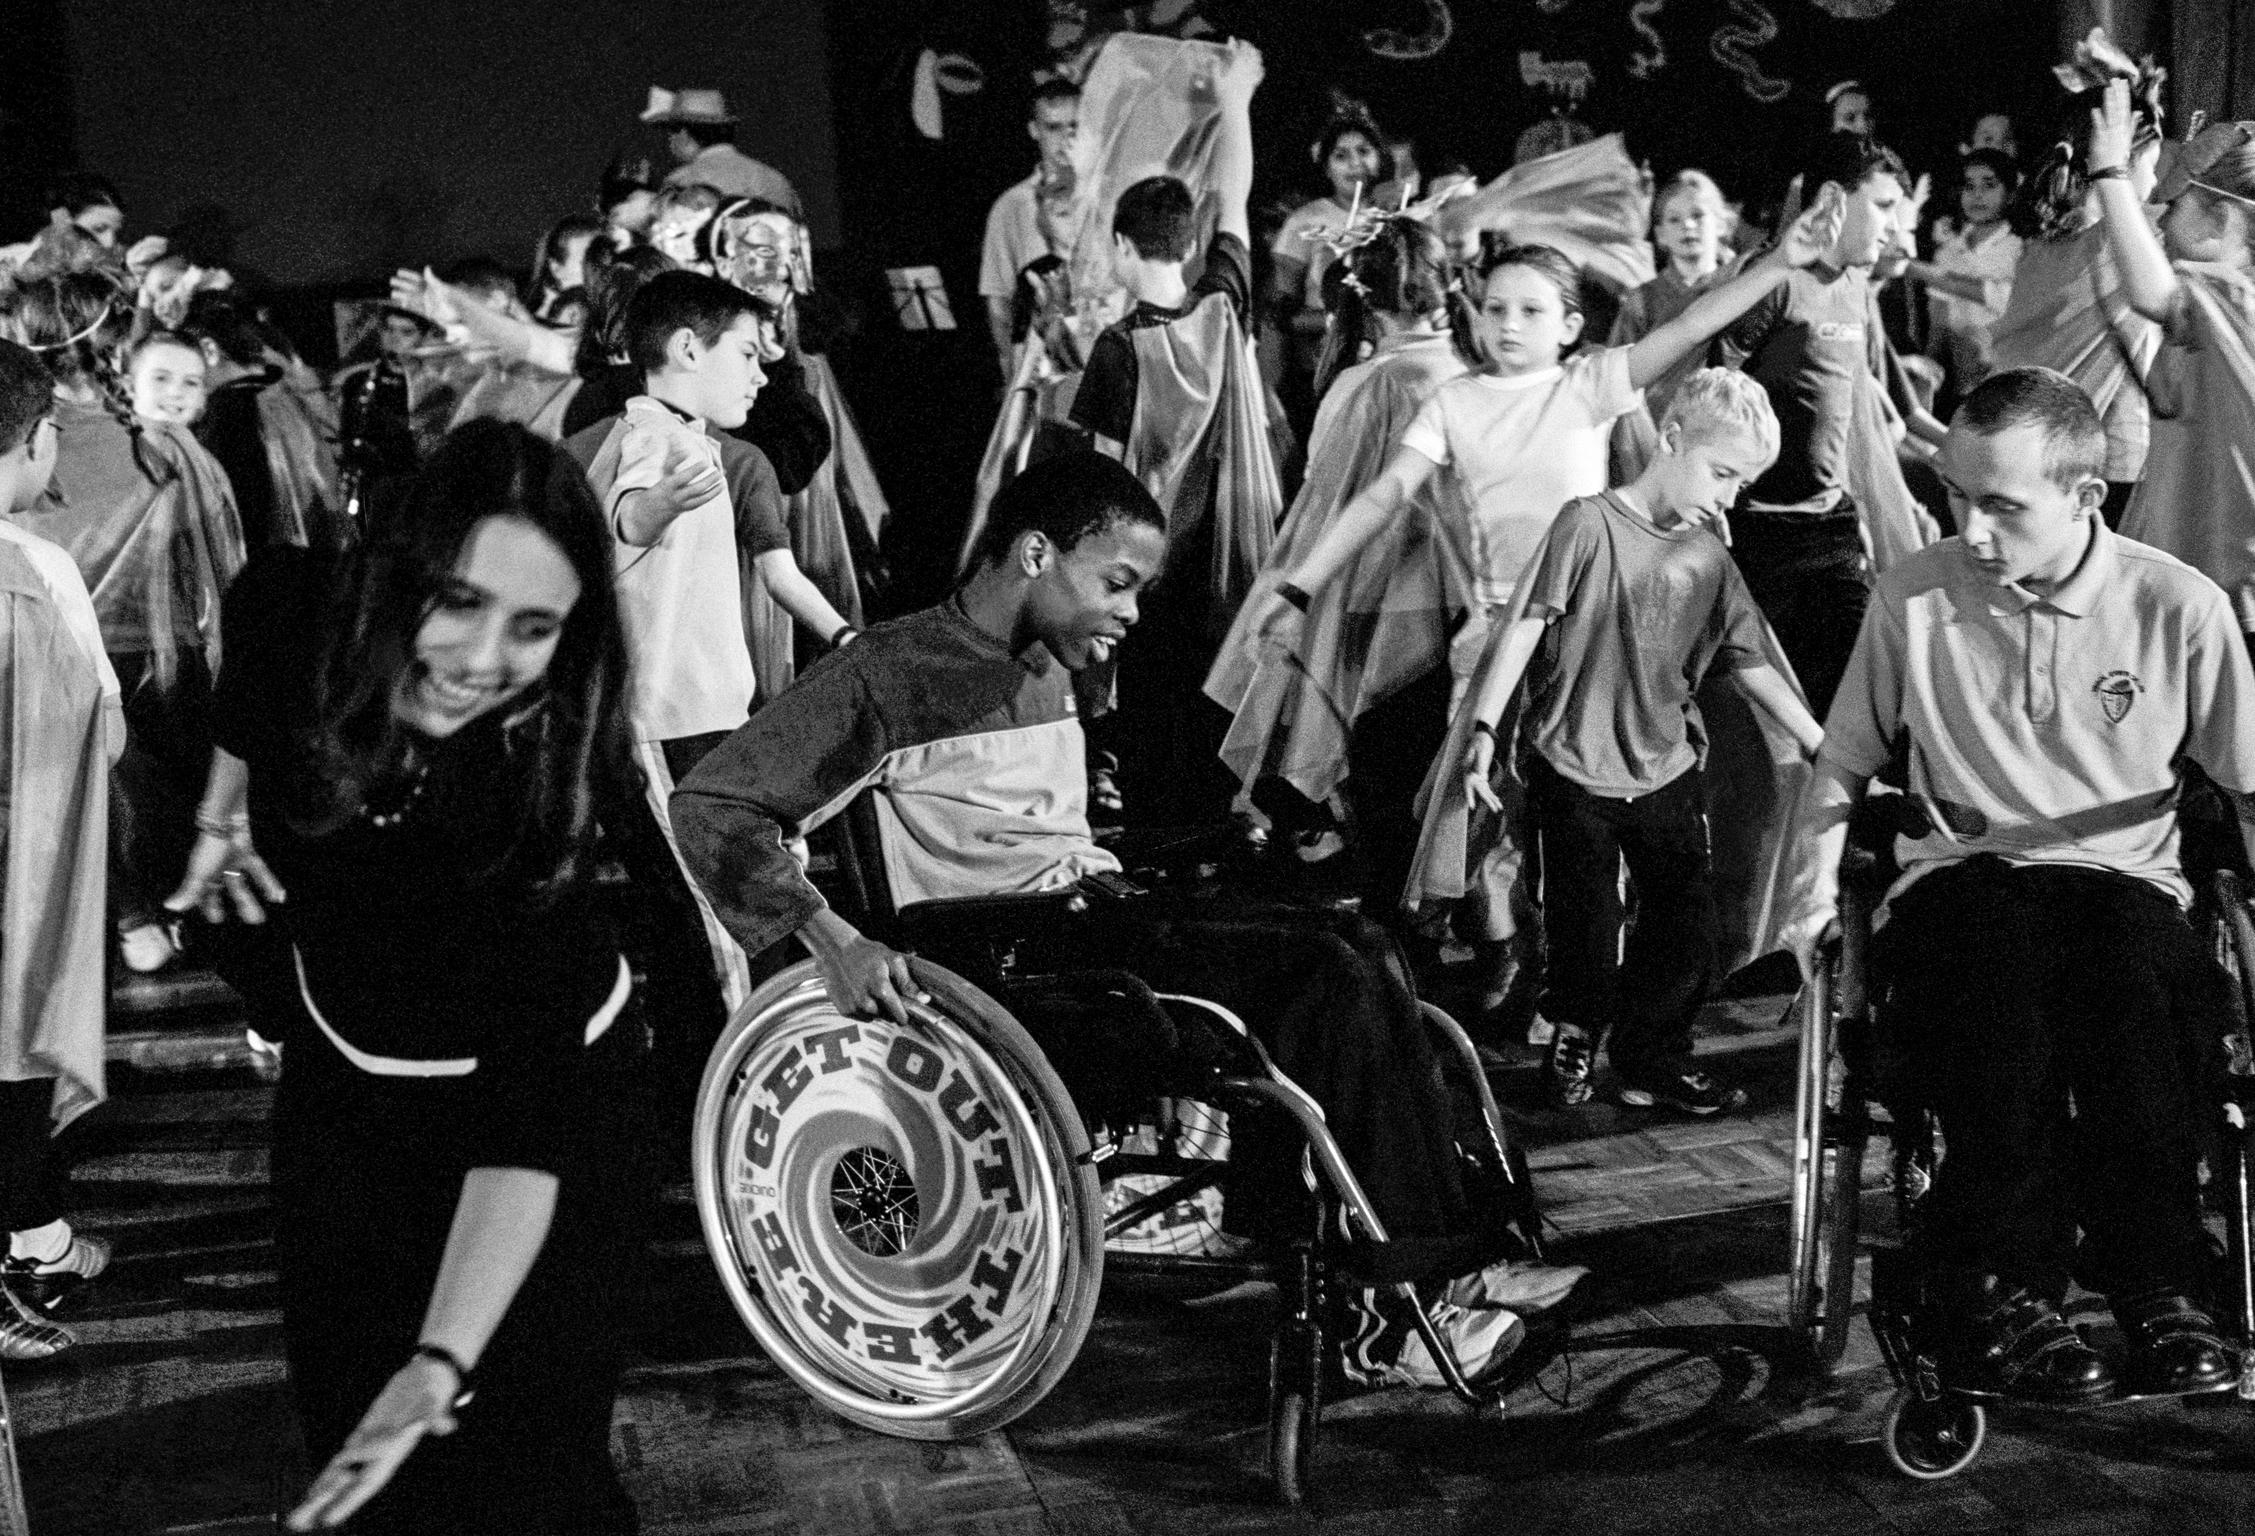 Patua Dance Company working with disabled children at the City Hall. Cardiff, Wales